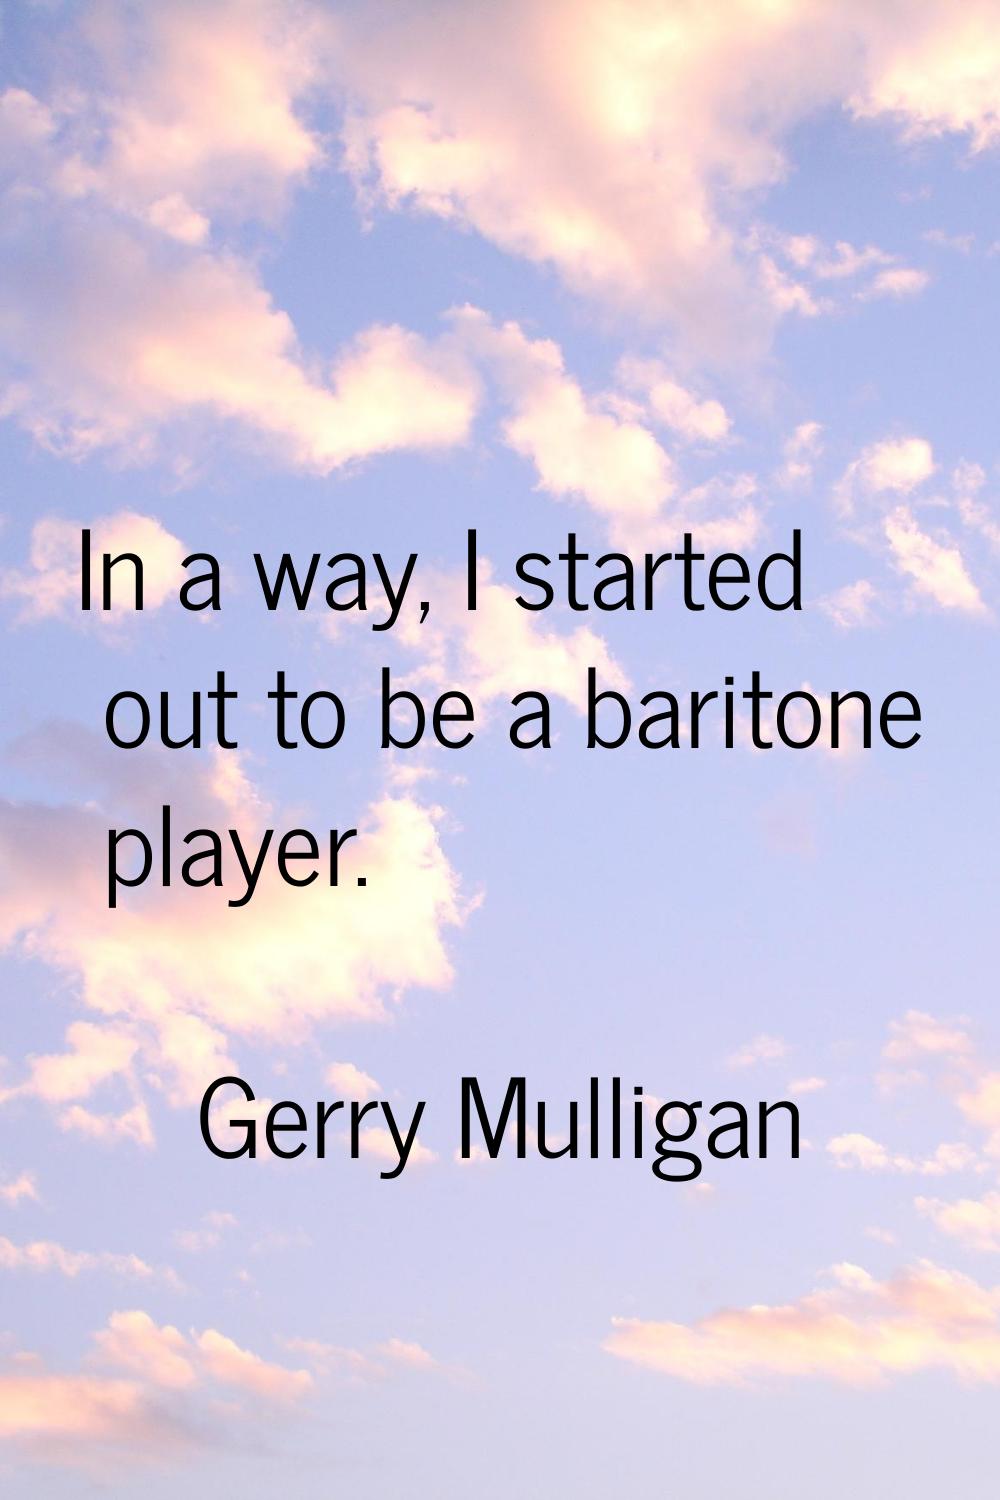 In a way, I started out to be a baritone player.